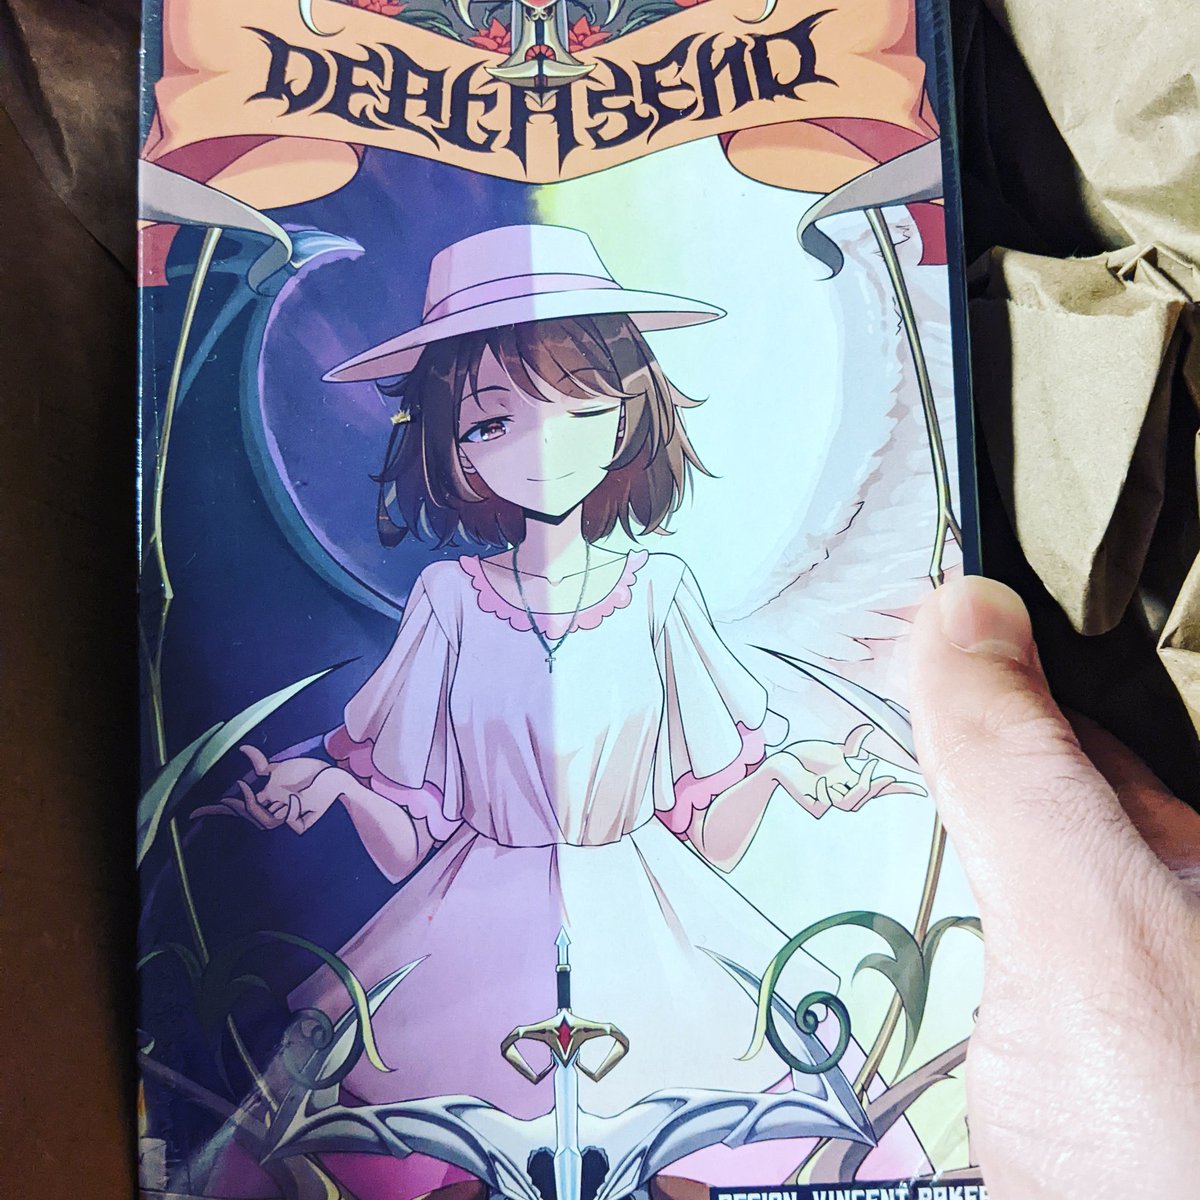 New video is up, unboxing Deathsend!

(Link in the comments!) 👇